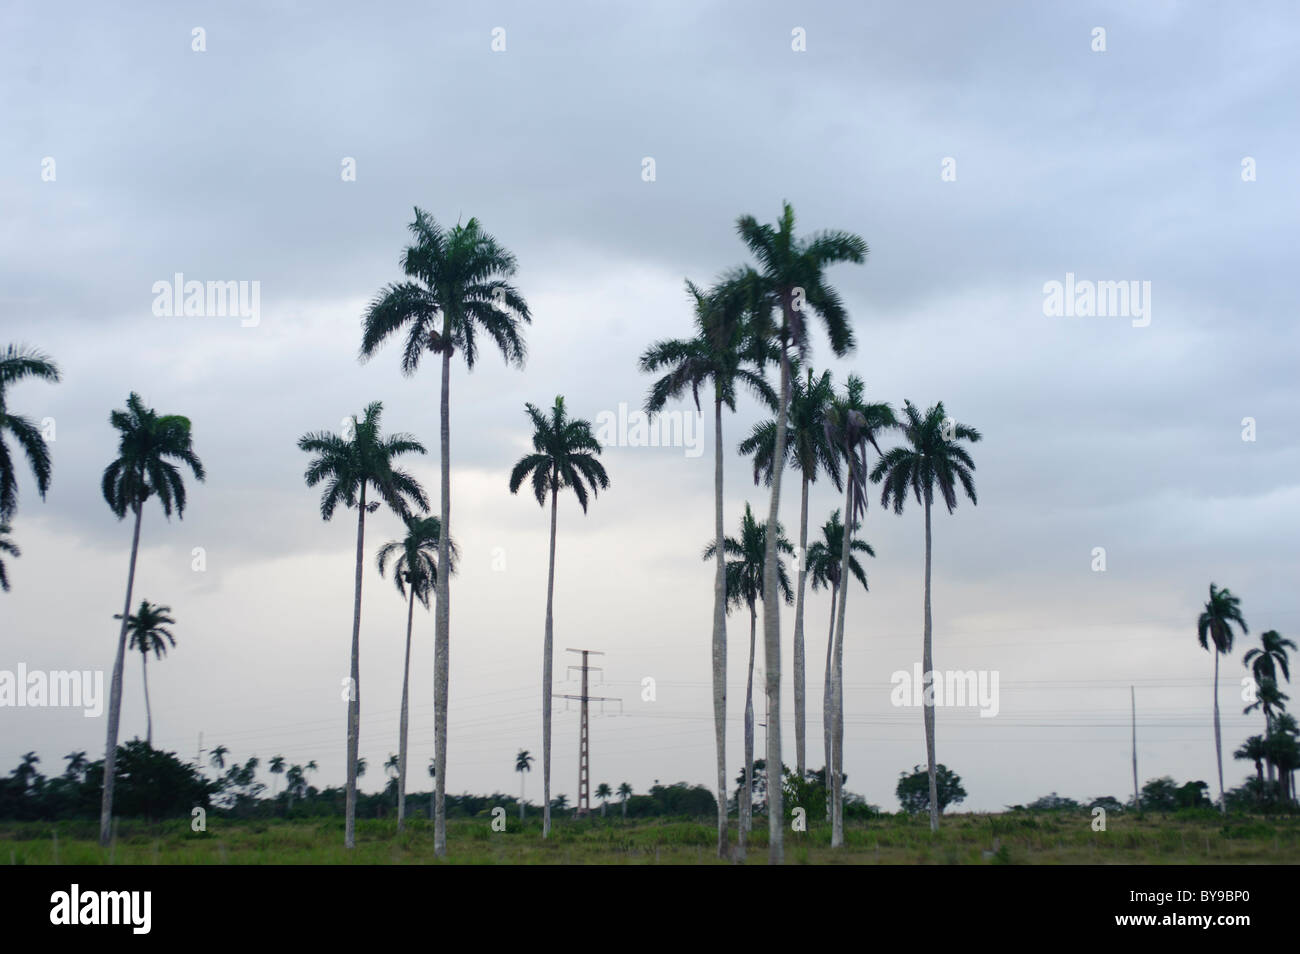 View of Palmtrees in Cuba with greysky. Stock Photo